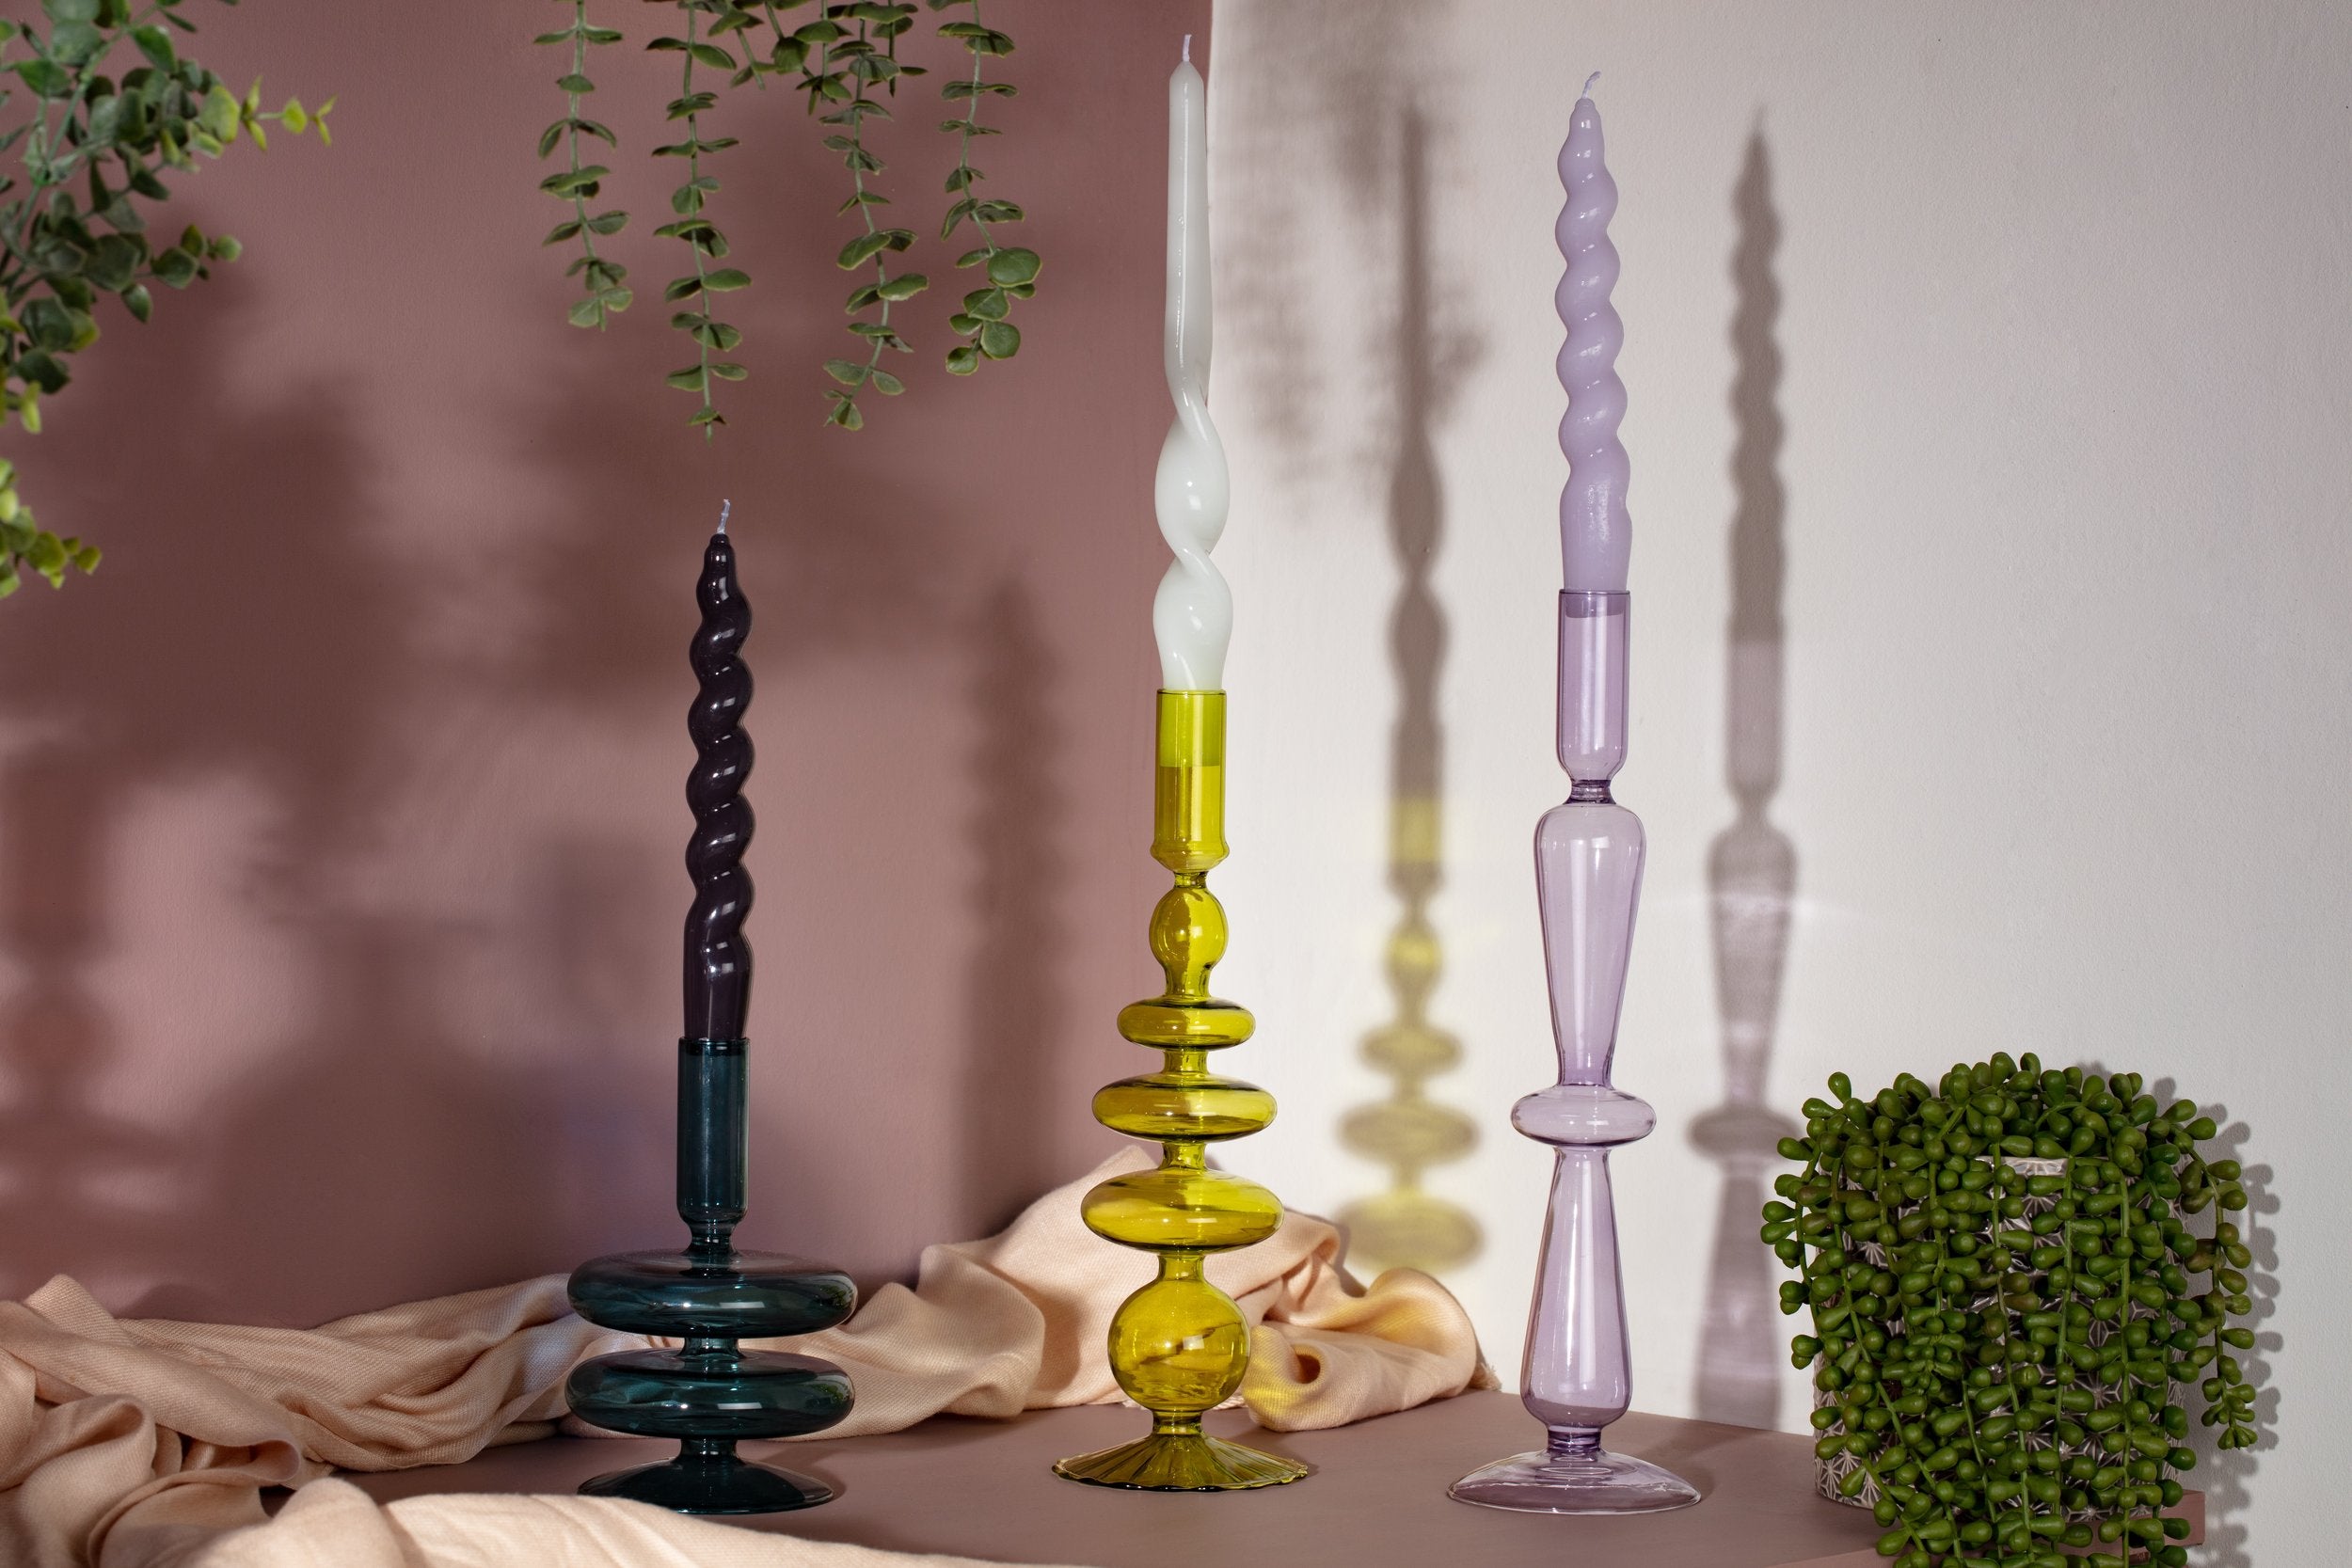 Taper Coloured Glass Candle holder - Lilac